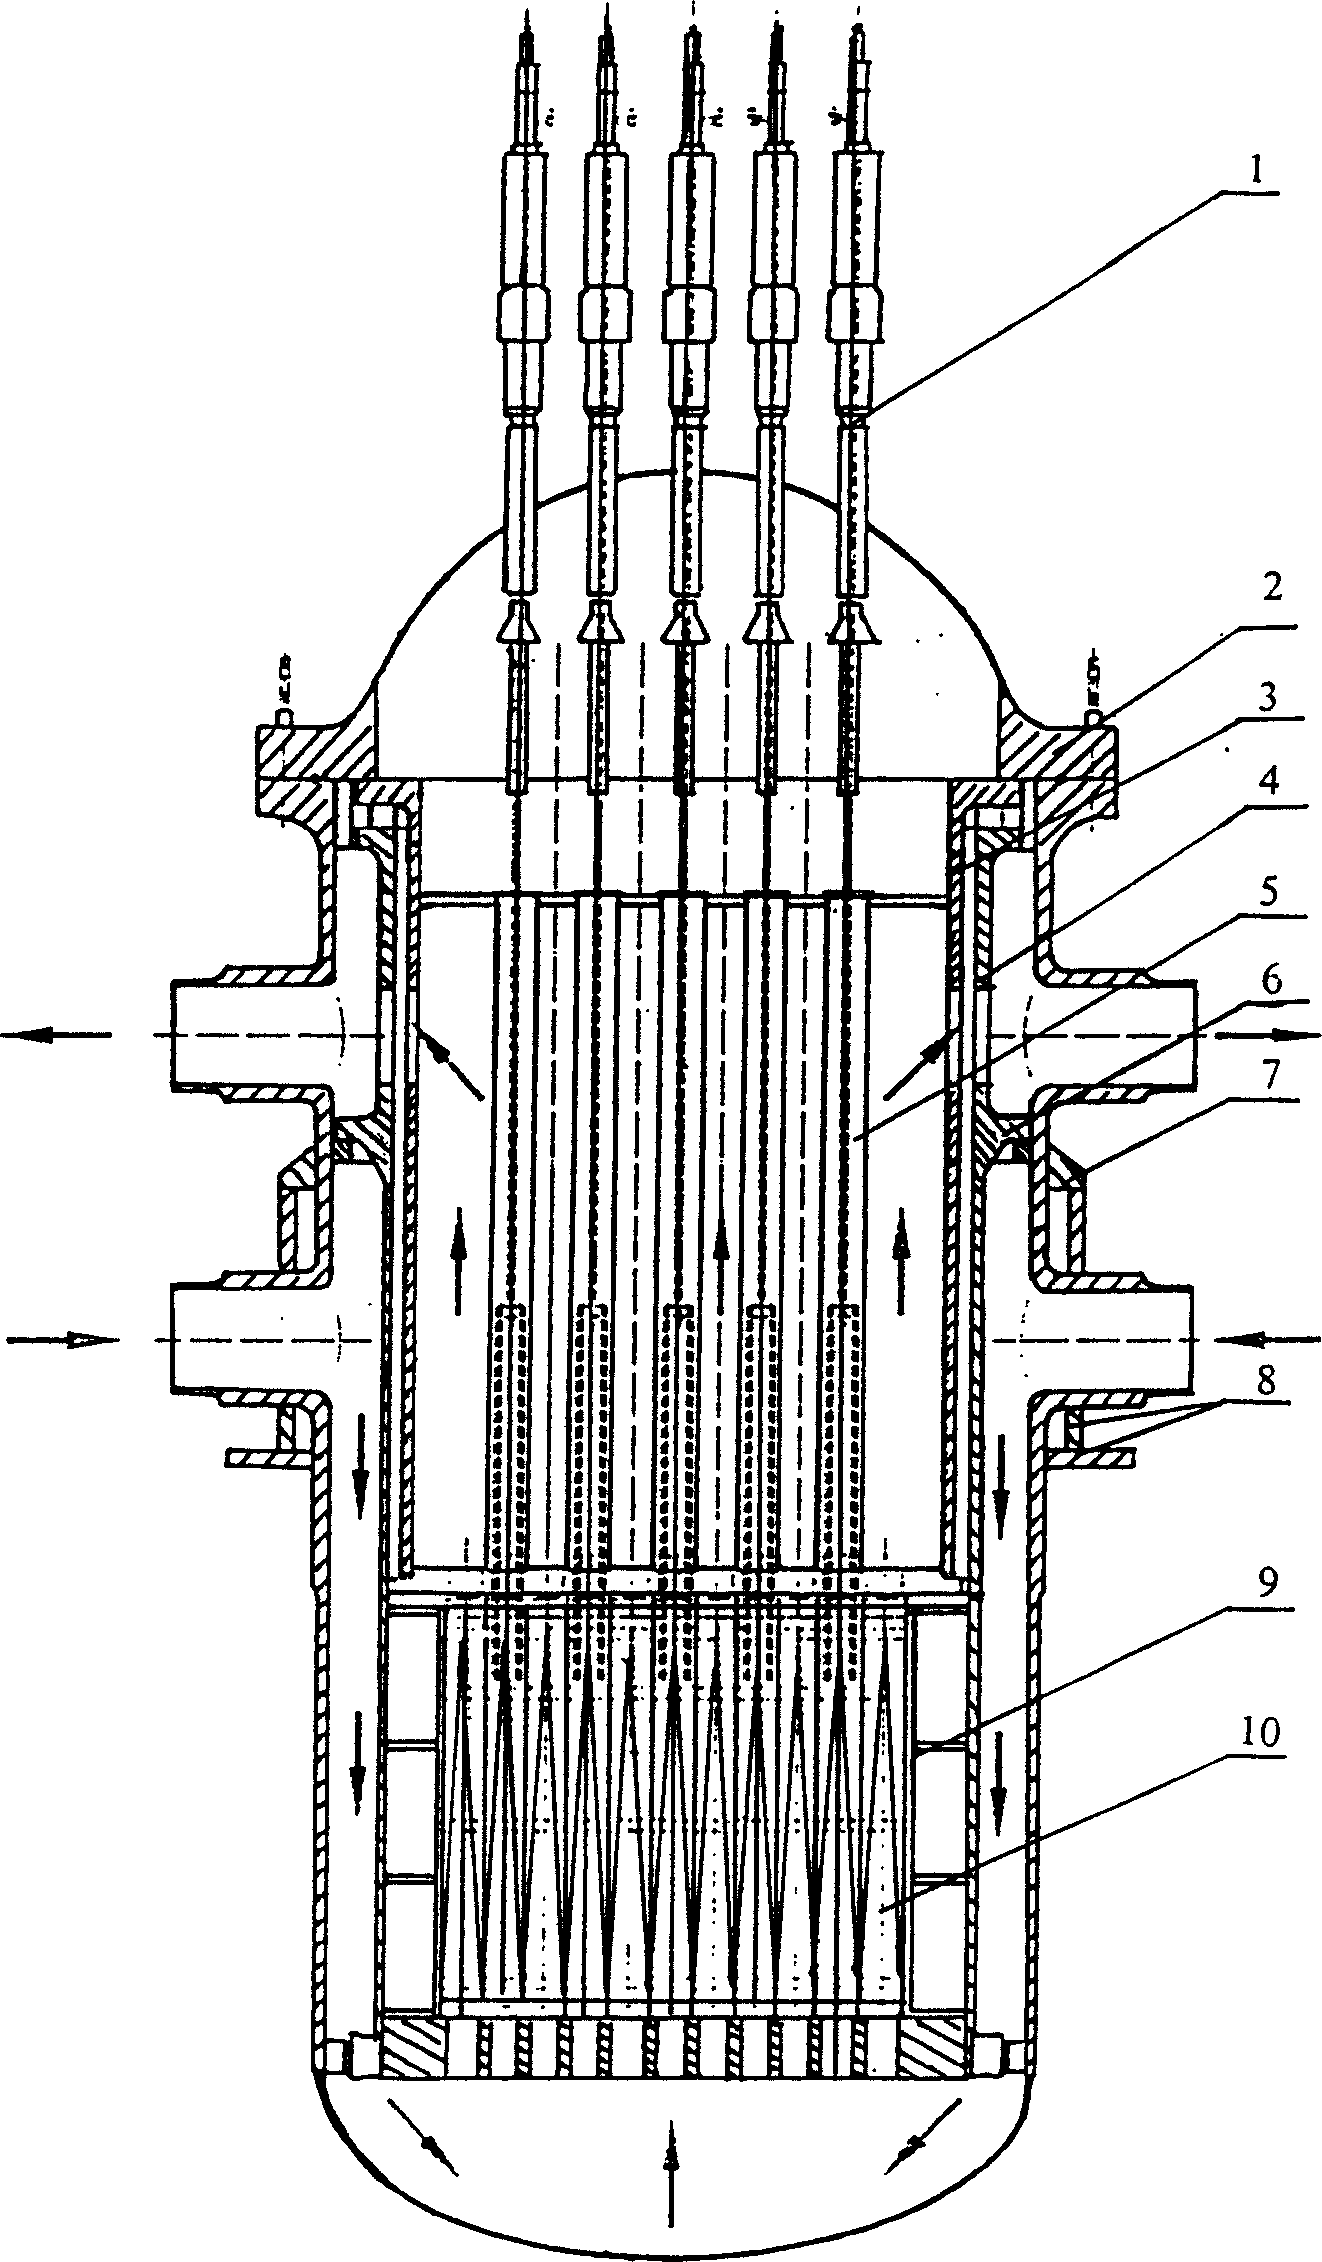 Shell type reactor in normal presure and low temperature